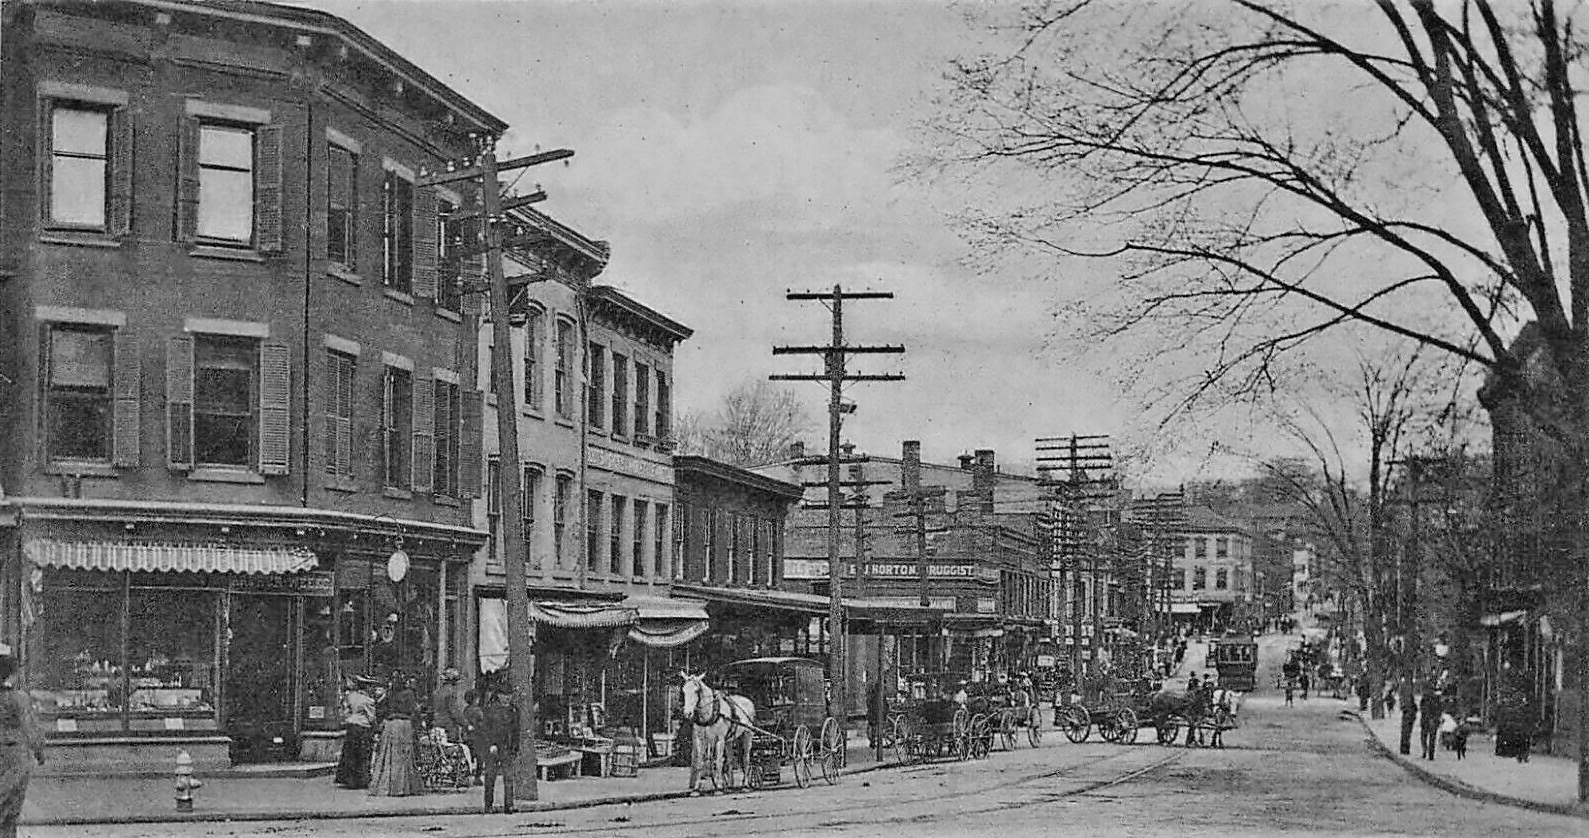 South Division Street From South Street, Peekskill NY, Westchester County